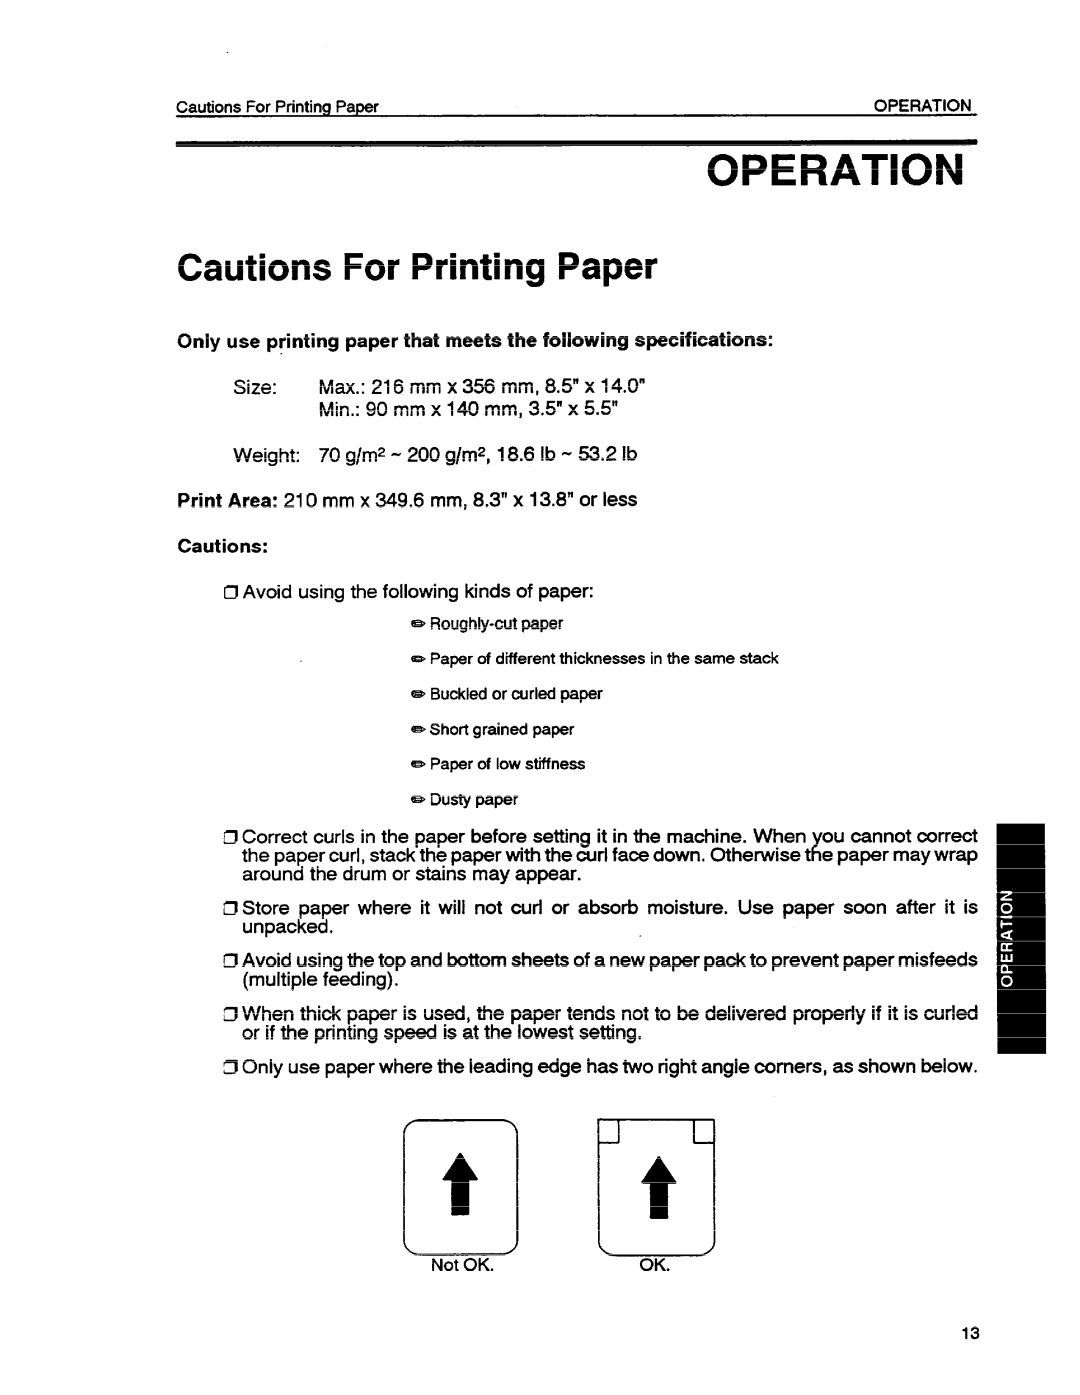 Ricoh VT1730 manual Operation, Cautions For Printing Paper 